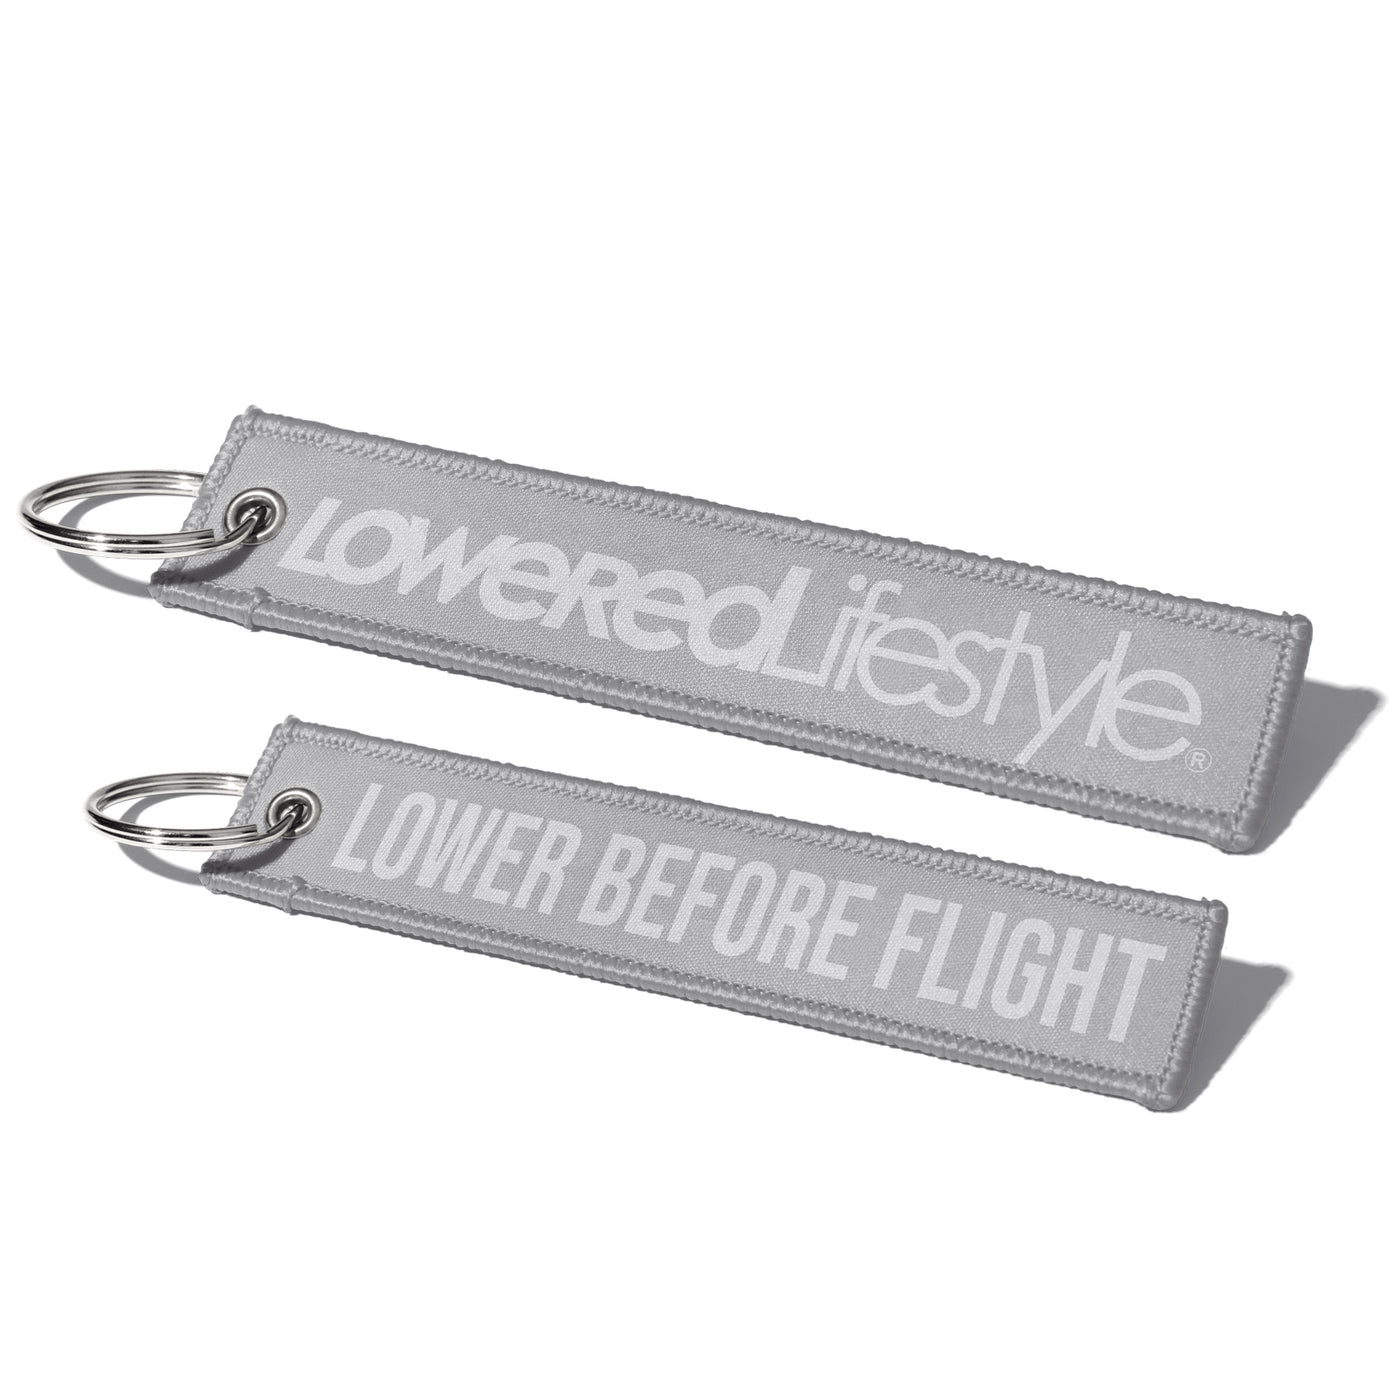 Flight Tag - Lower Before Flight (Double Grey)